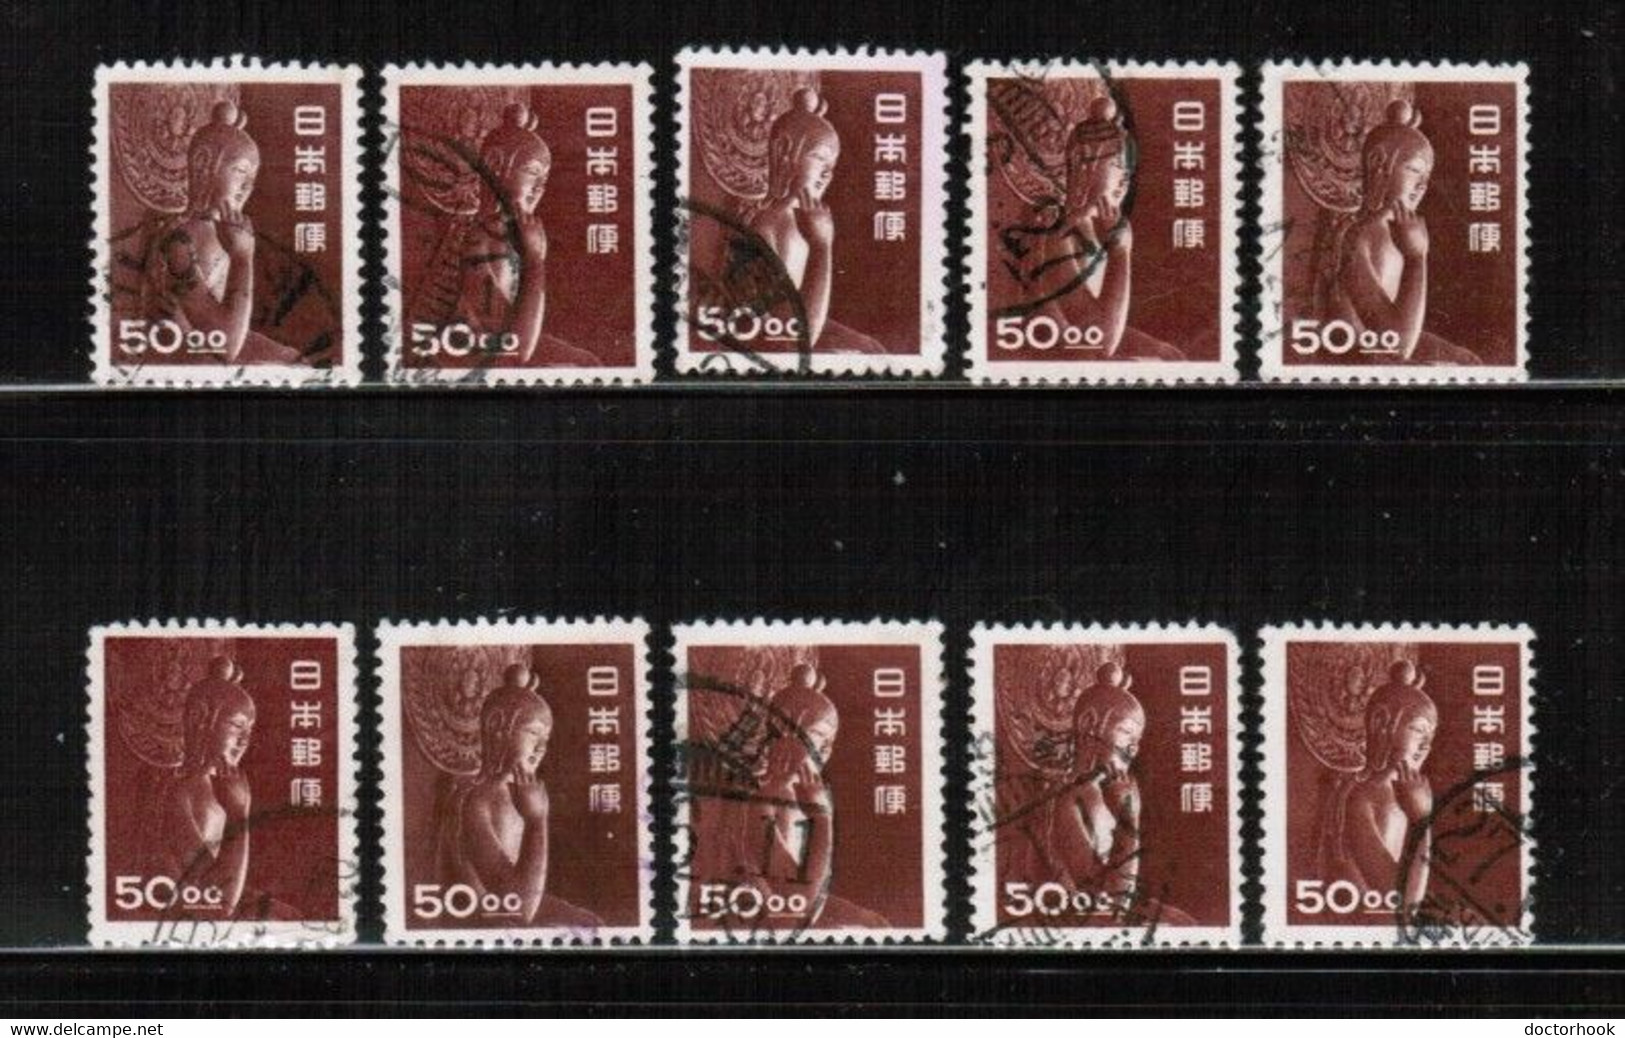 JAPAN   Scott # 521 USED WHOLESALE LOT OF 10 (CONDITION AS PER SCAN) (WH-600) - Lots & Serien